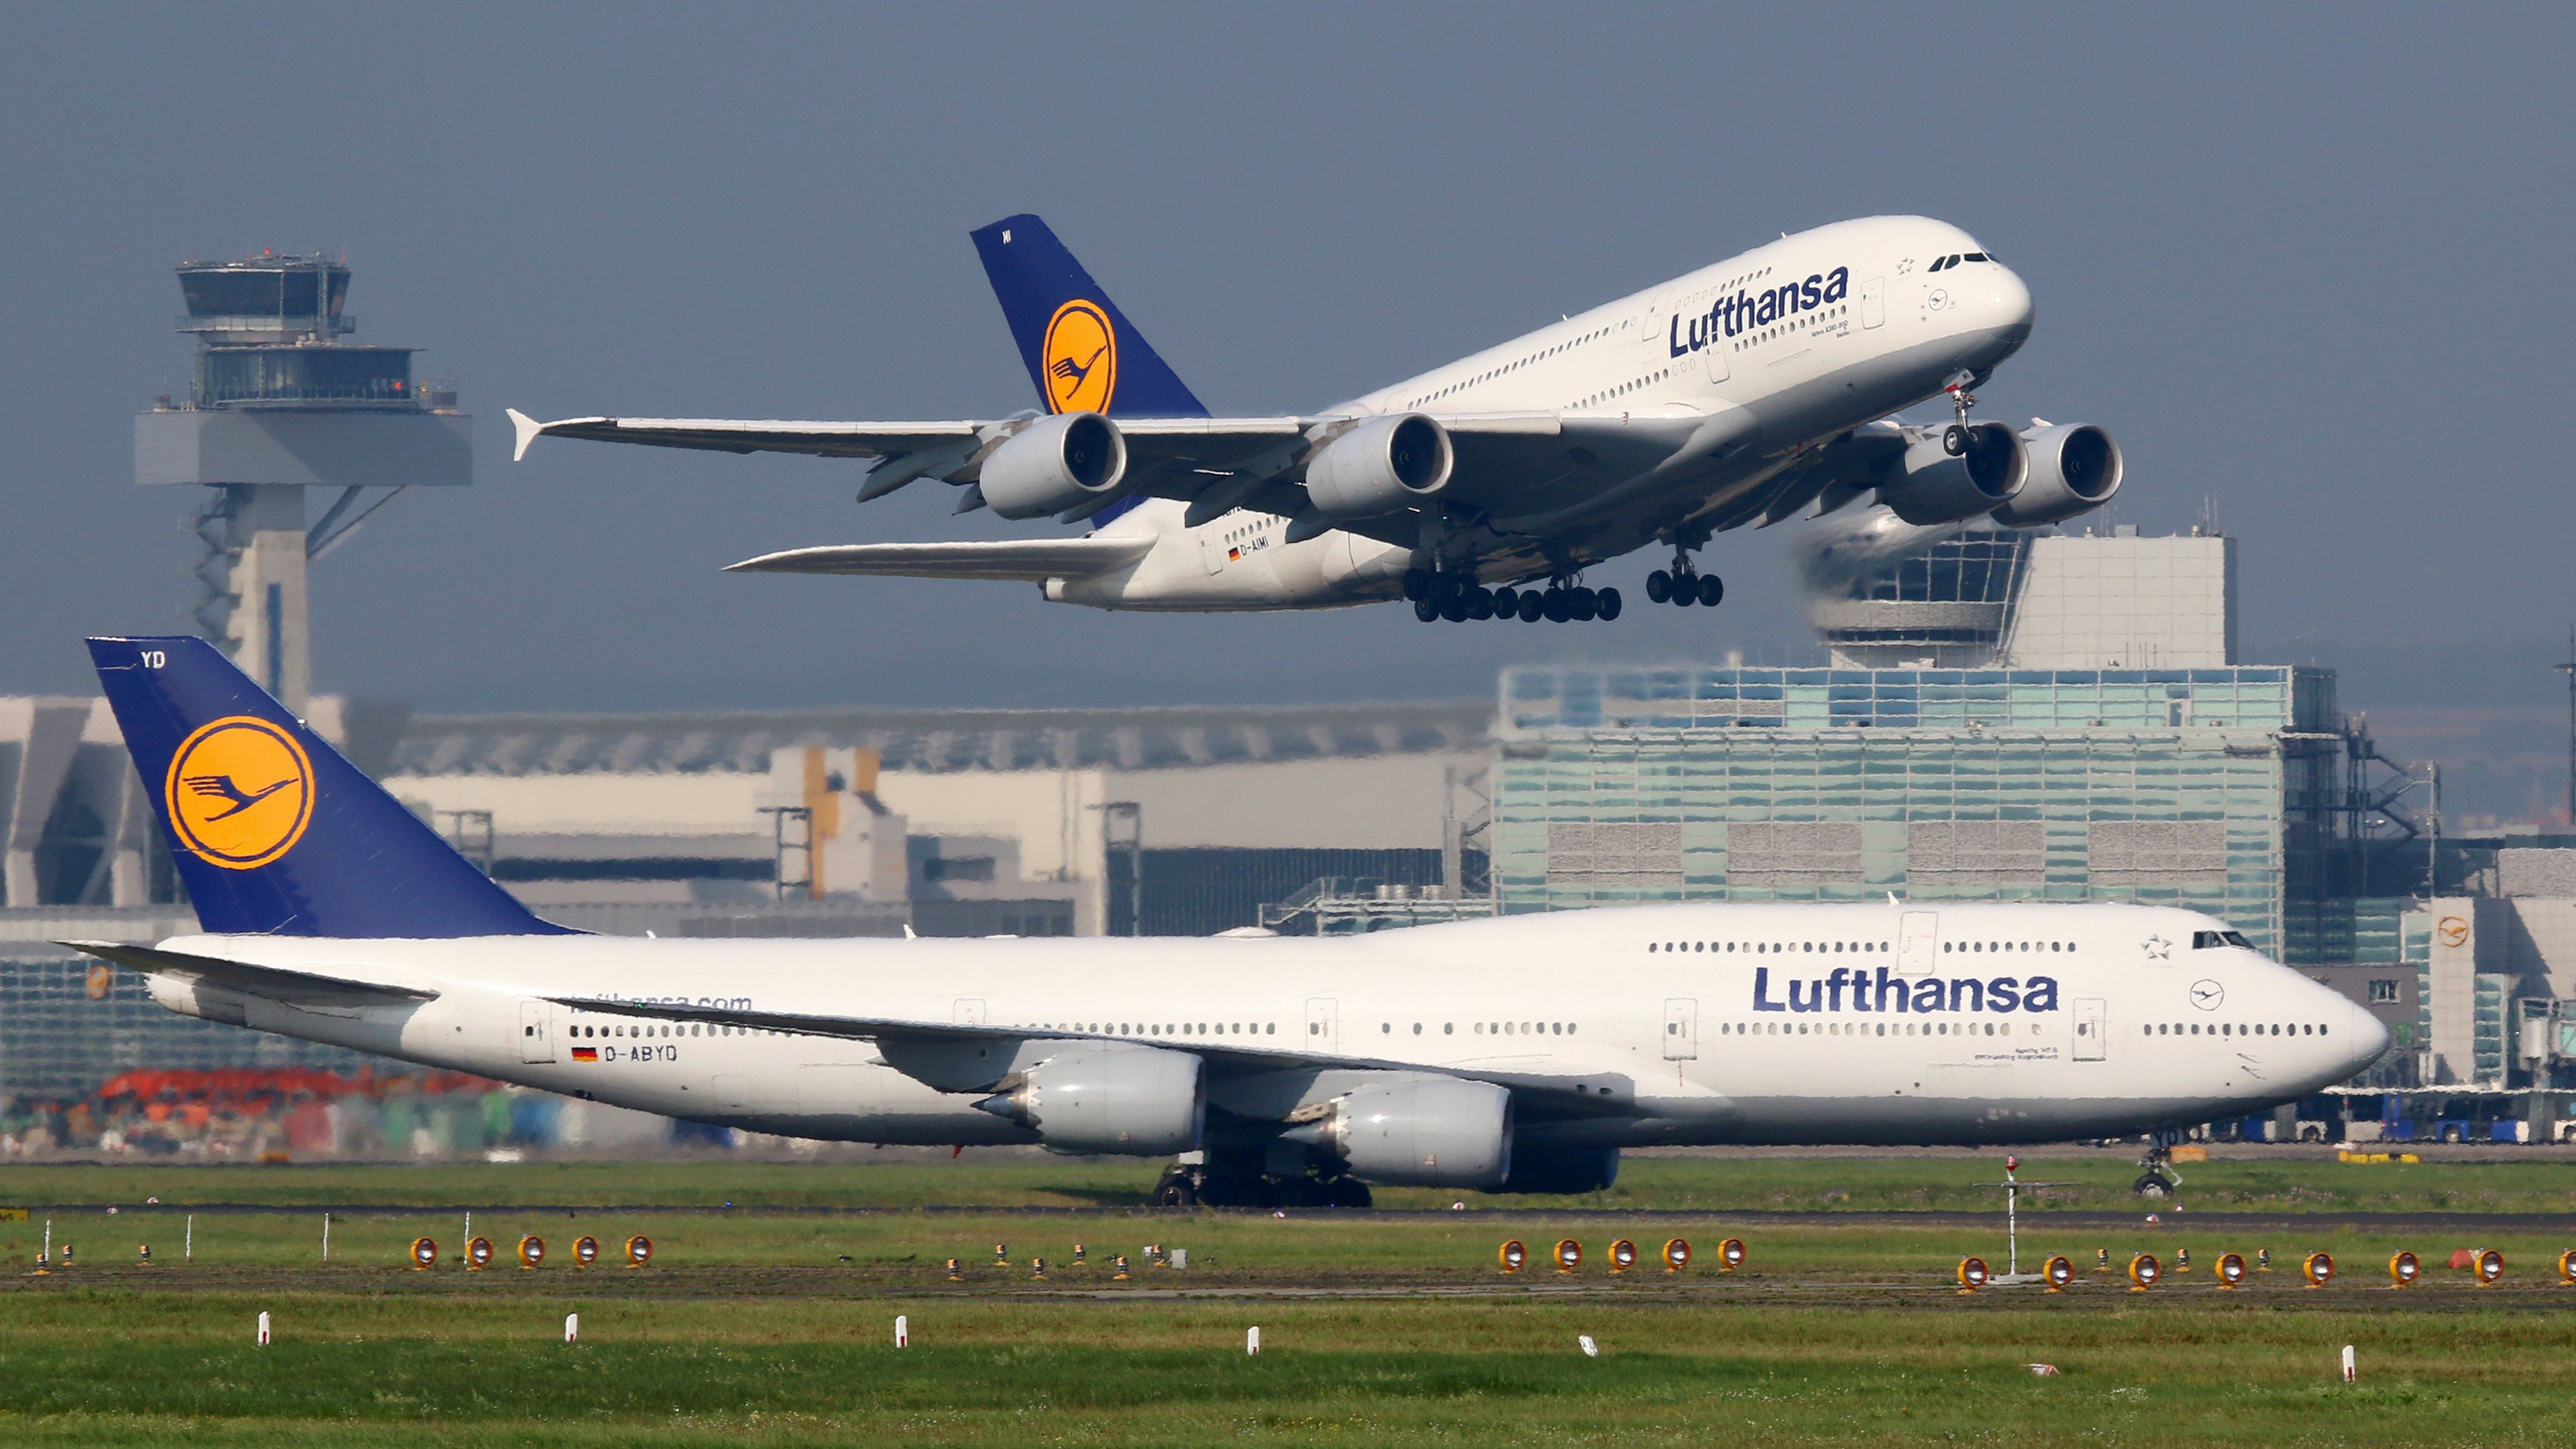 Double-Decker Die-Hards: The Airlines That Have Flown Both The Airbus A380 & The Boeing 747